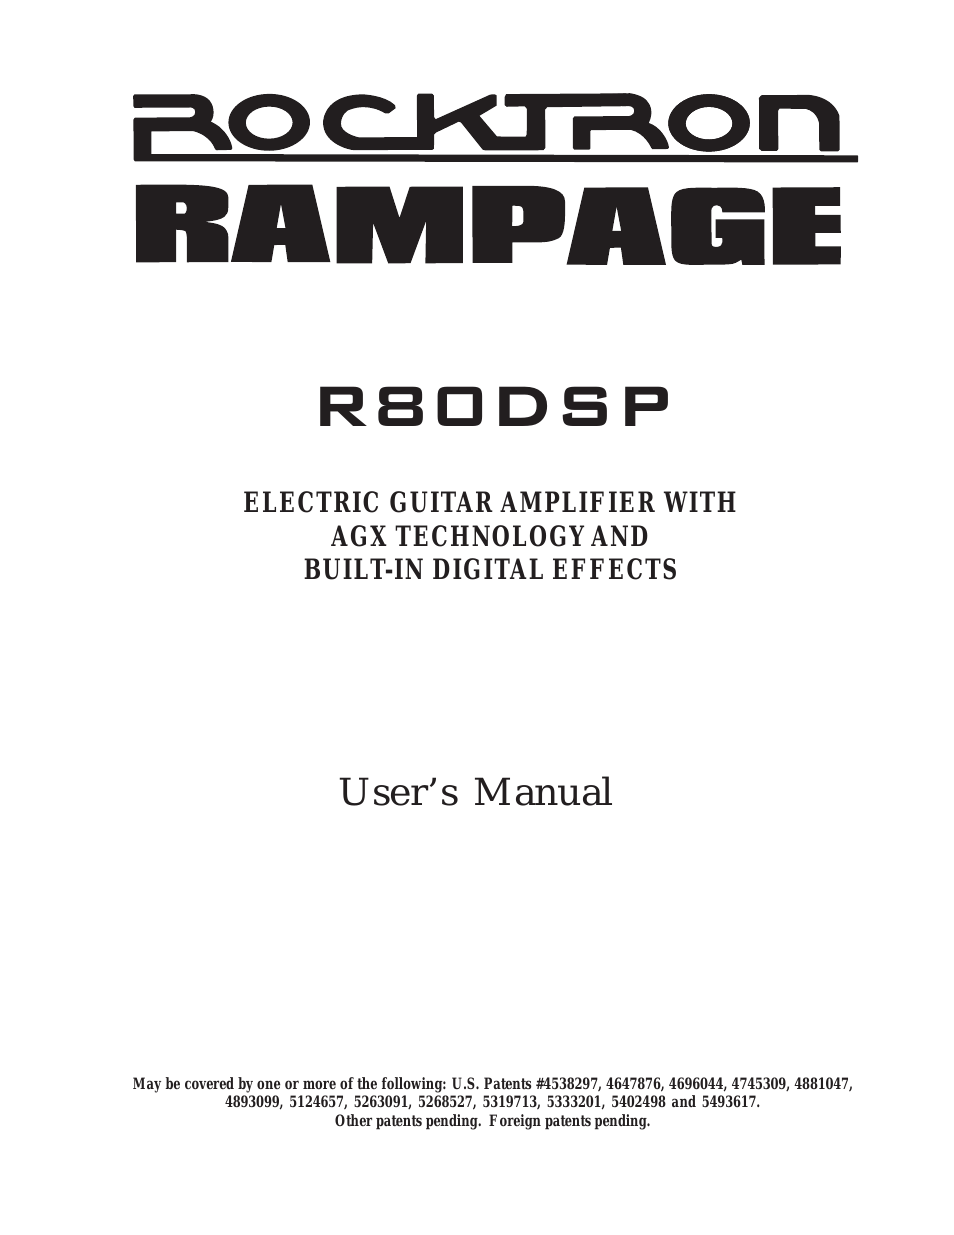 Rampage RB 60